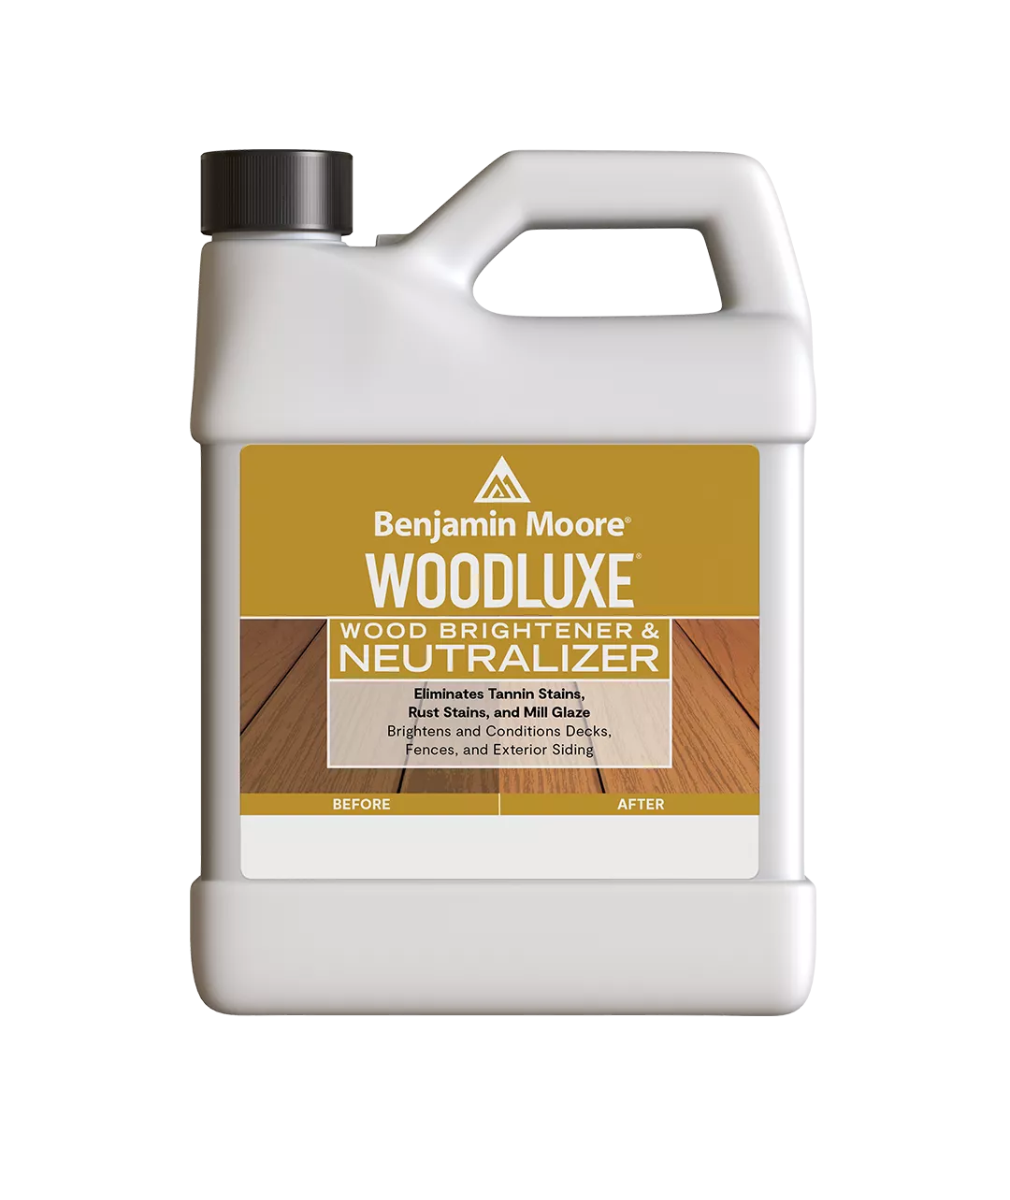 Benjamin Moore Woodluxe Wood Brightener & Neutralizer available at Wallauer.